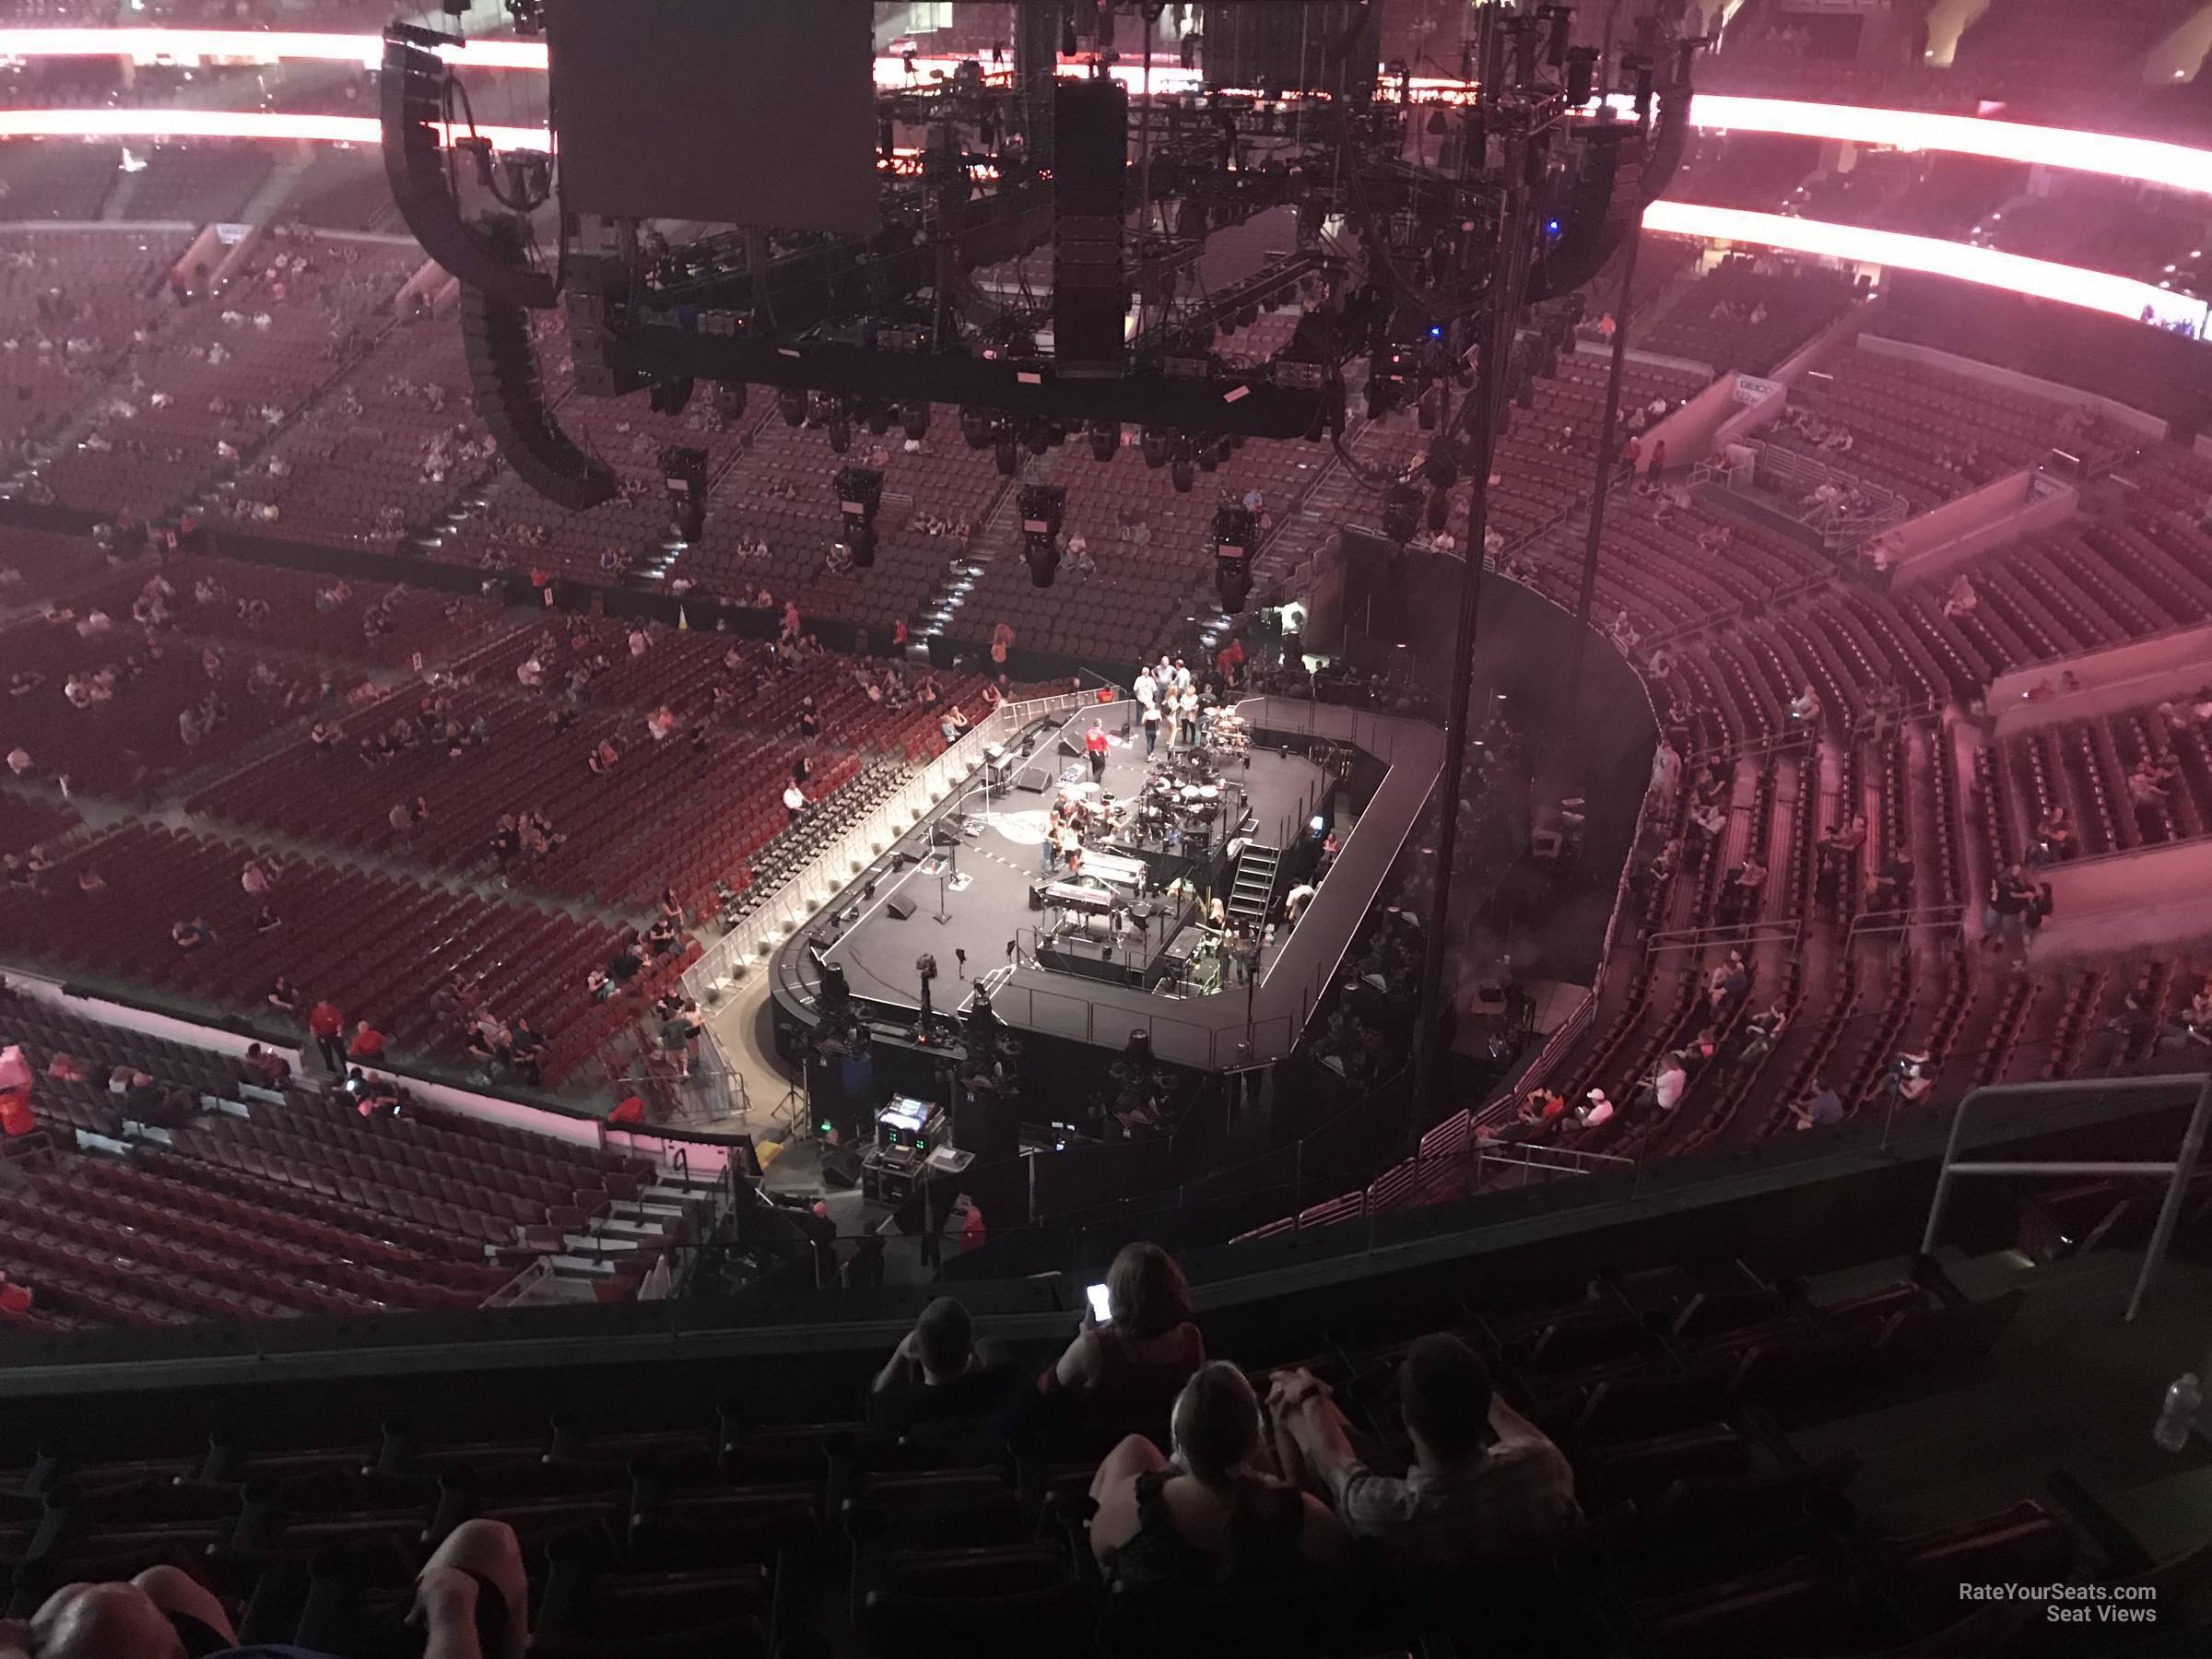 section 216, row 7 seat view  for concert - wells fargo center